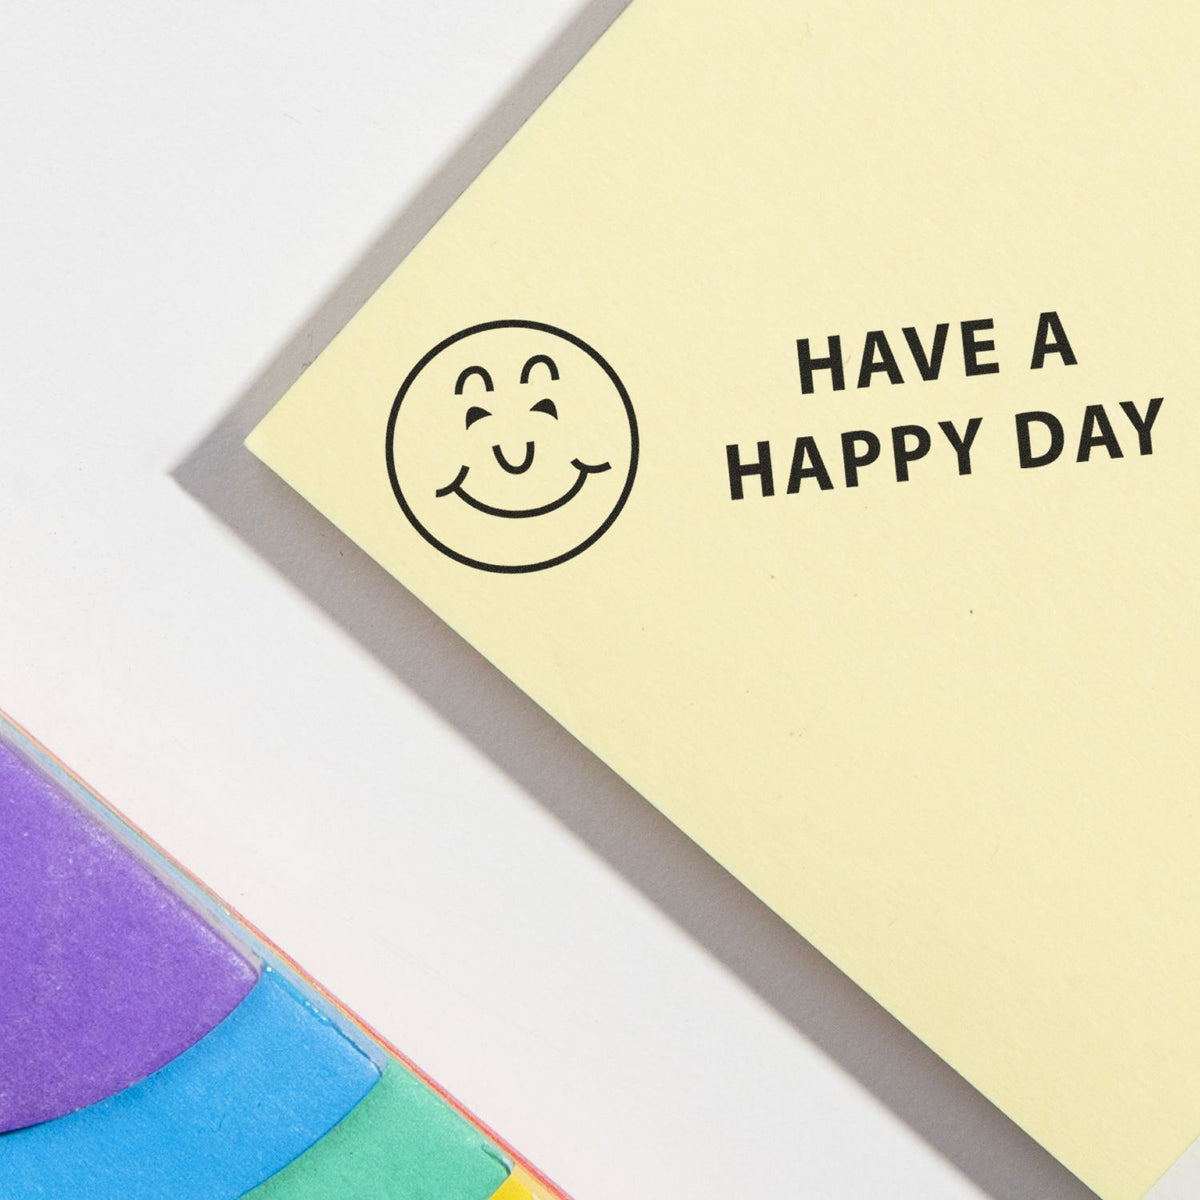 Have a Happy Day Rubber Stamp Lifestyle Photo